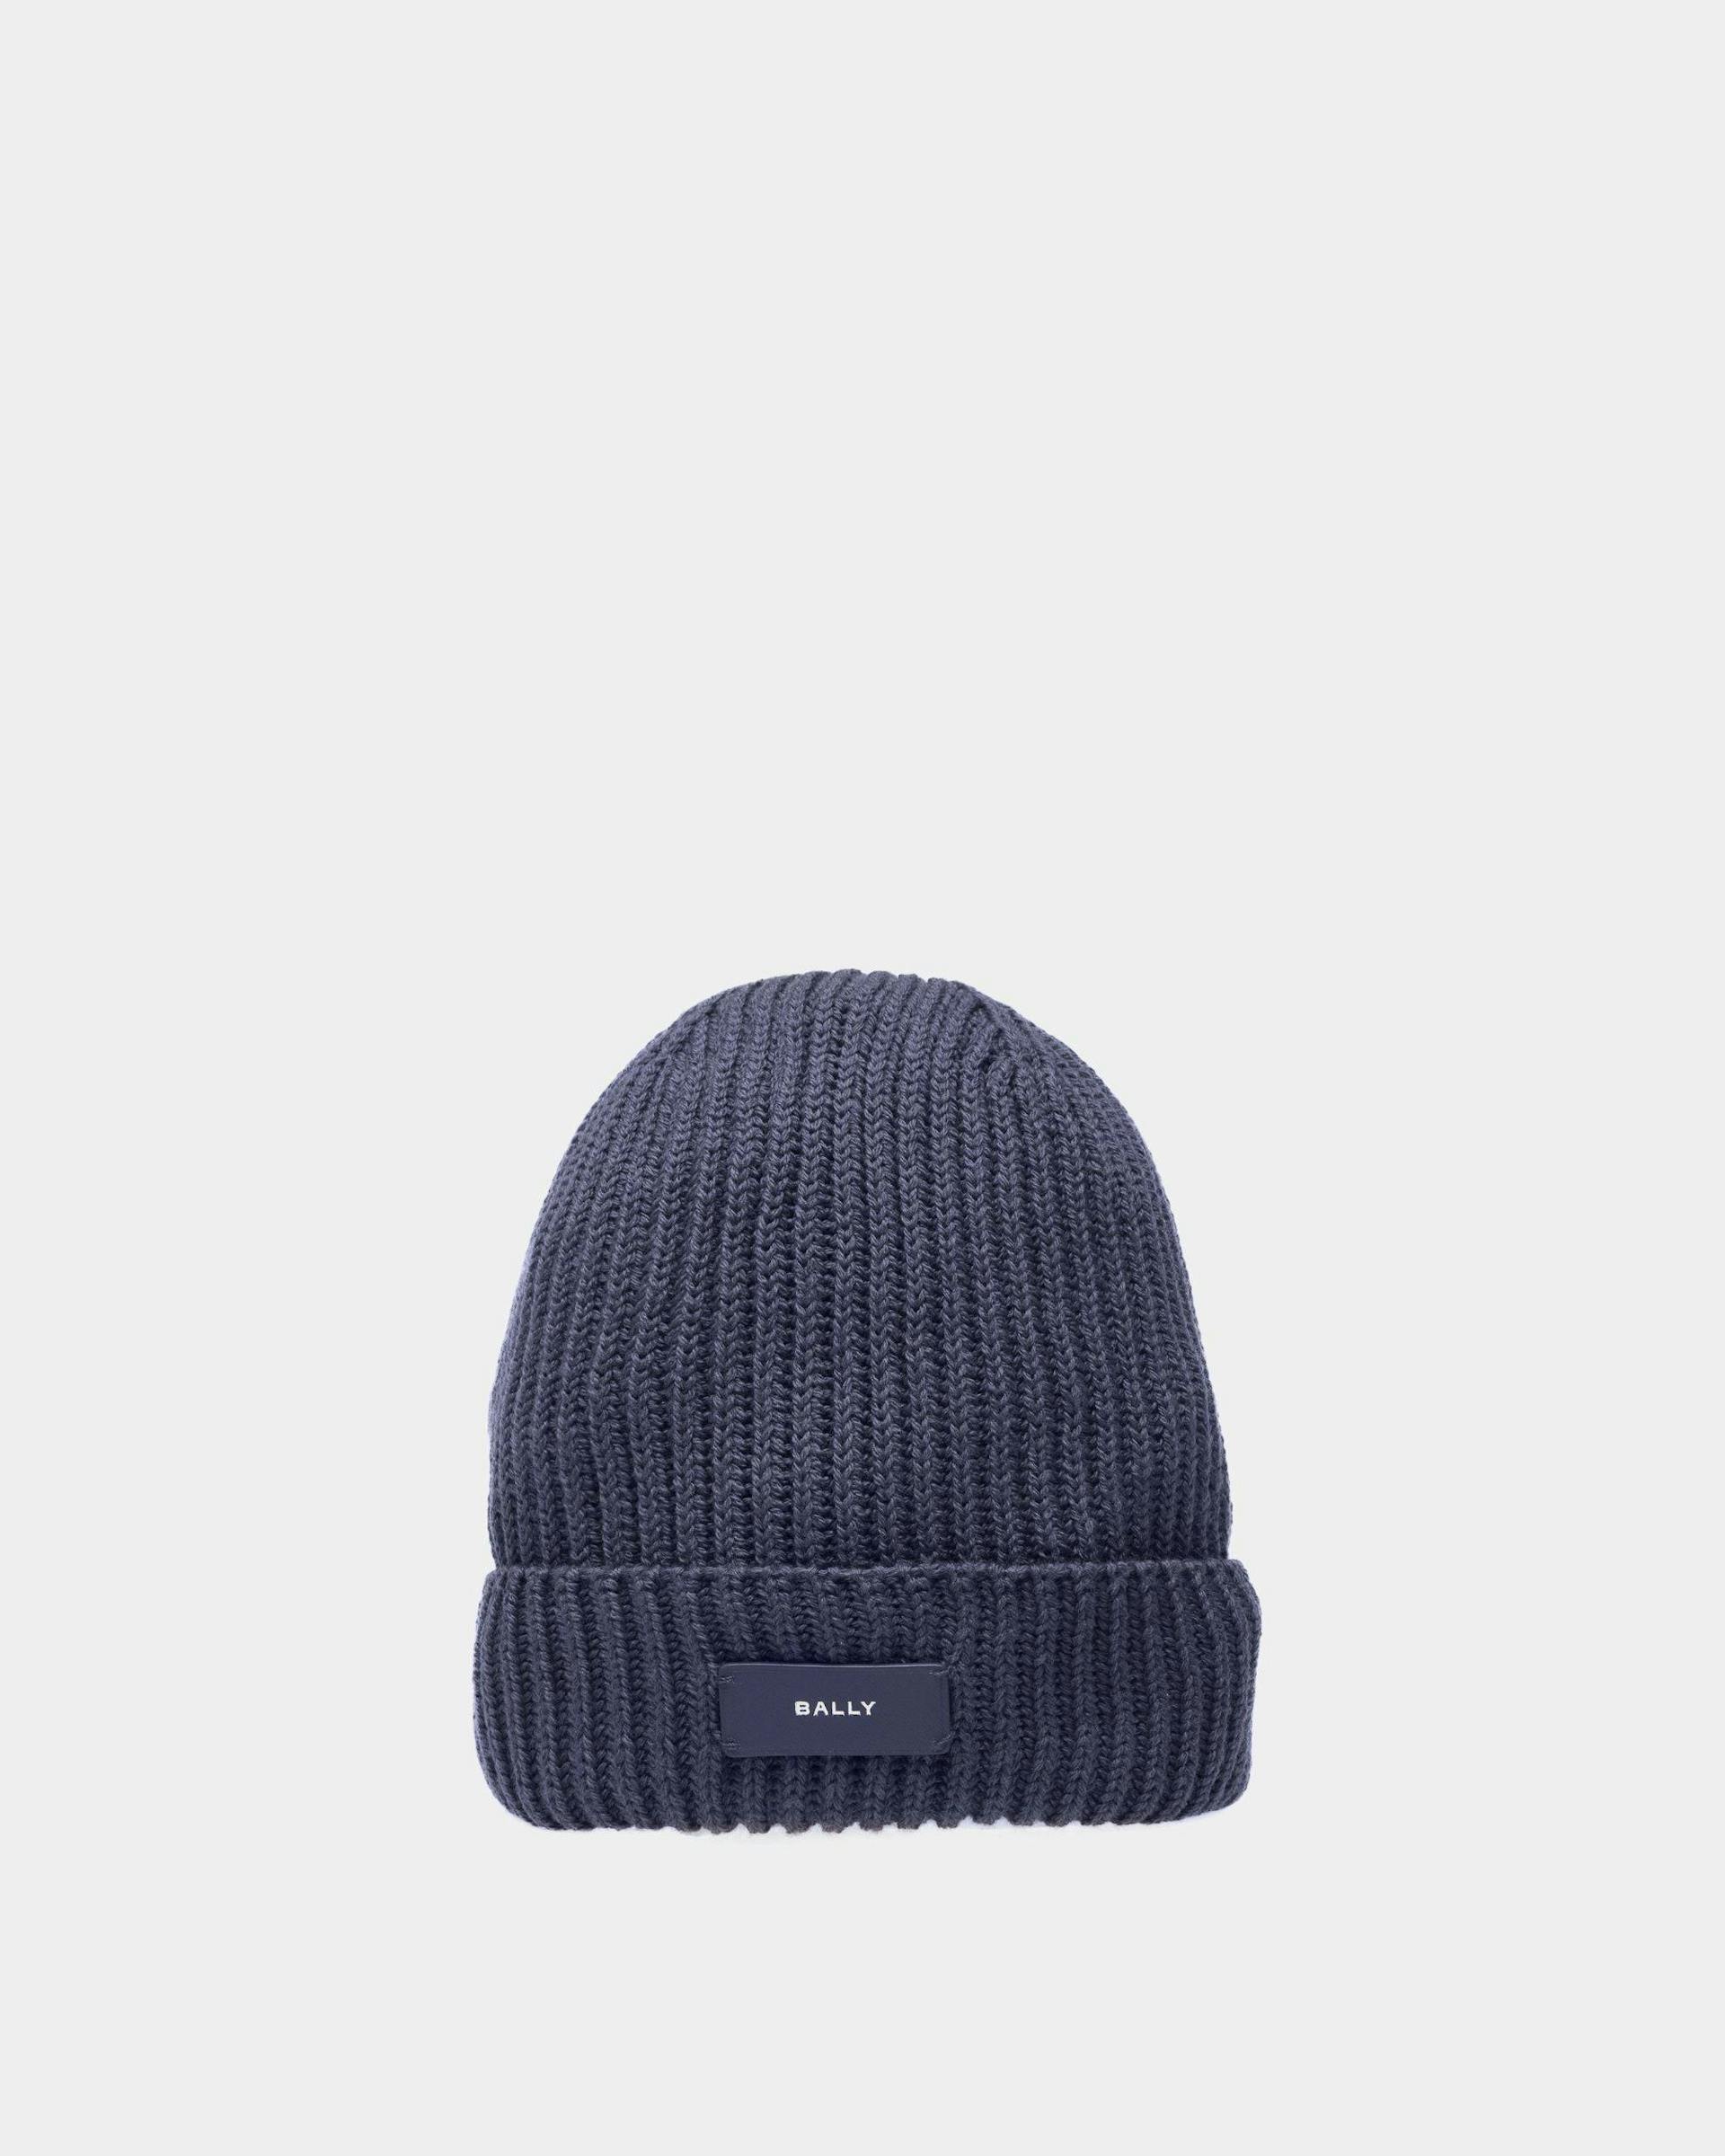 Men's Ribbed Beanie Hat In Midnight Wool | Bally | Still Life Front